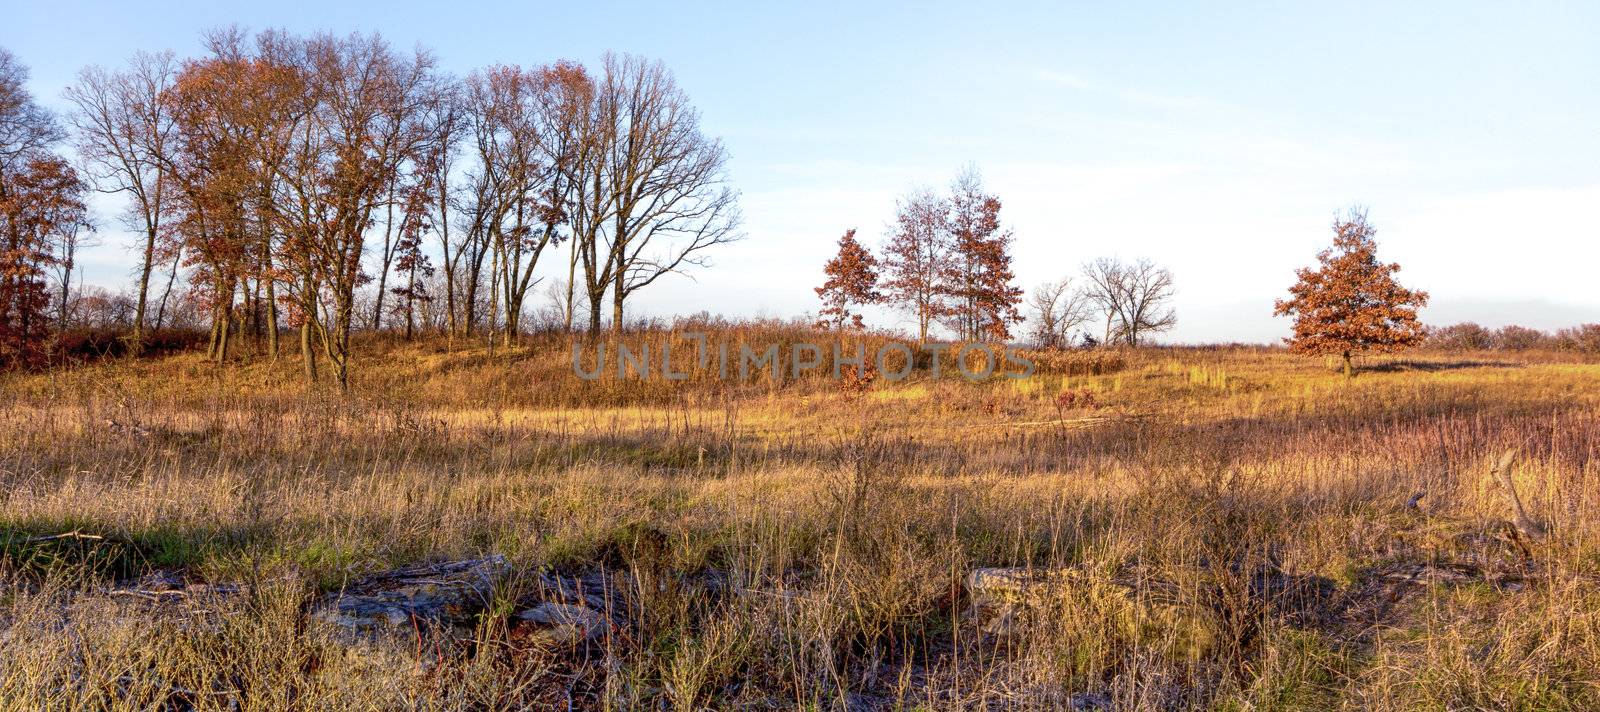 Late Afternoon on the Midwest Prairie in November by wolterk